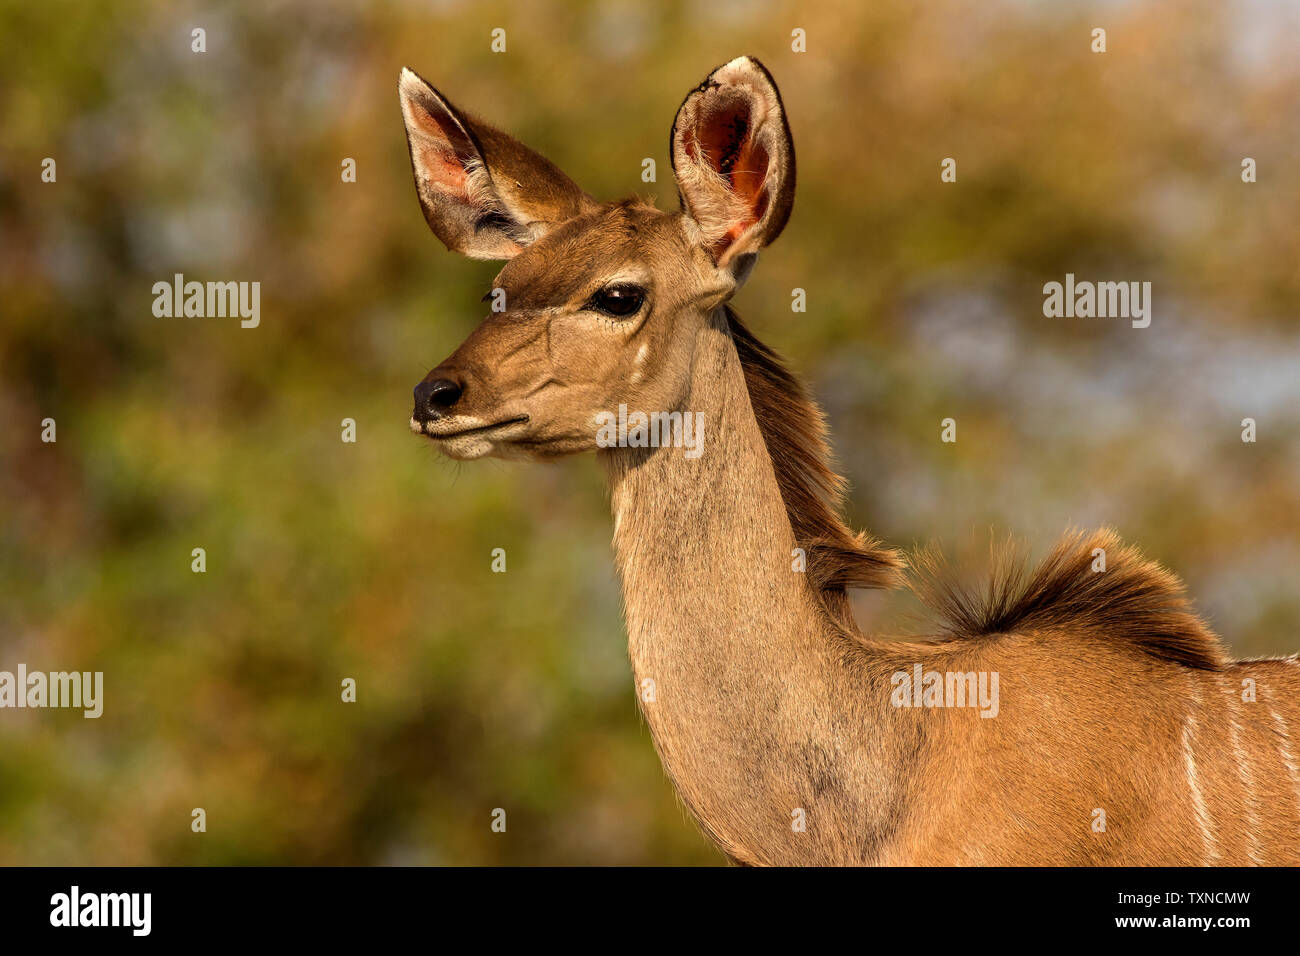 Kudu, head and shoulder side view, Kruger National Park, South Africa Stock Photo